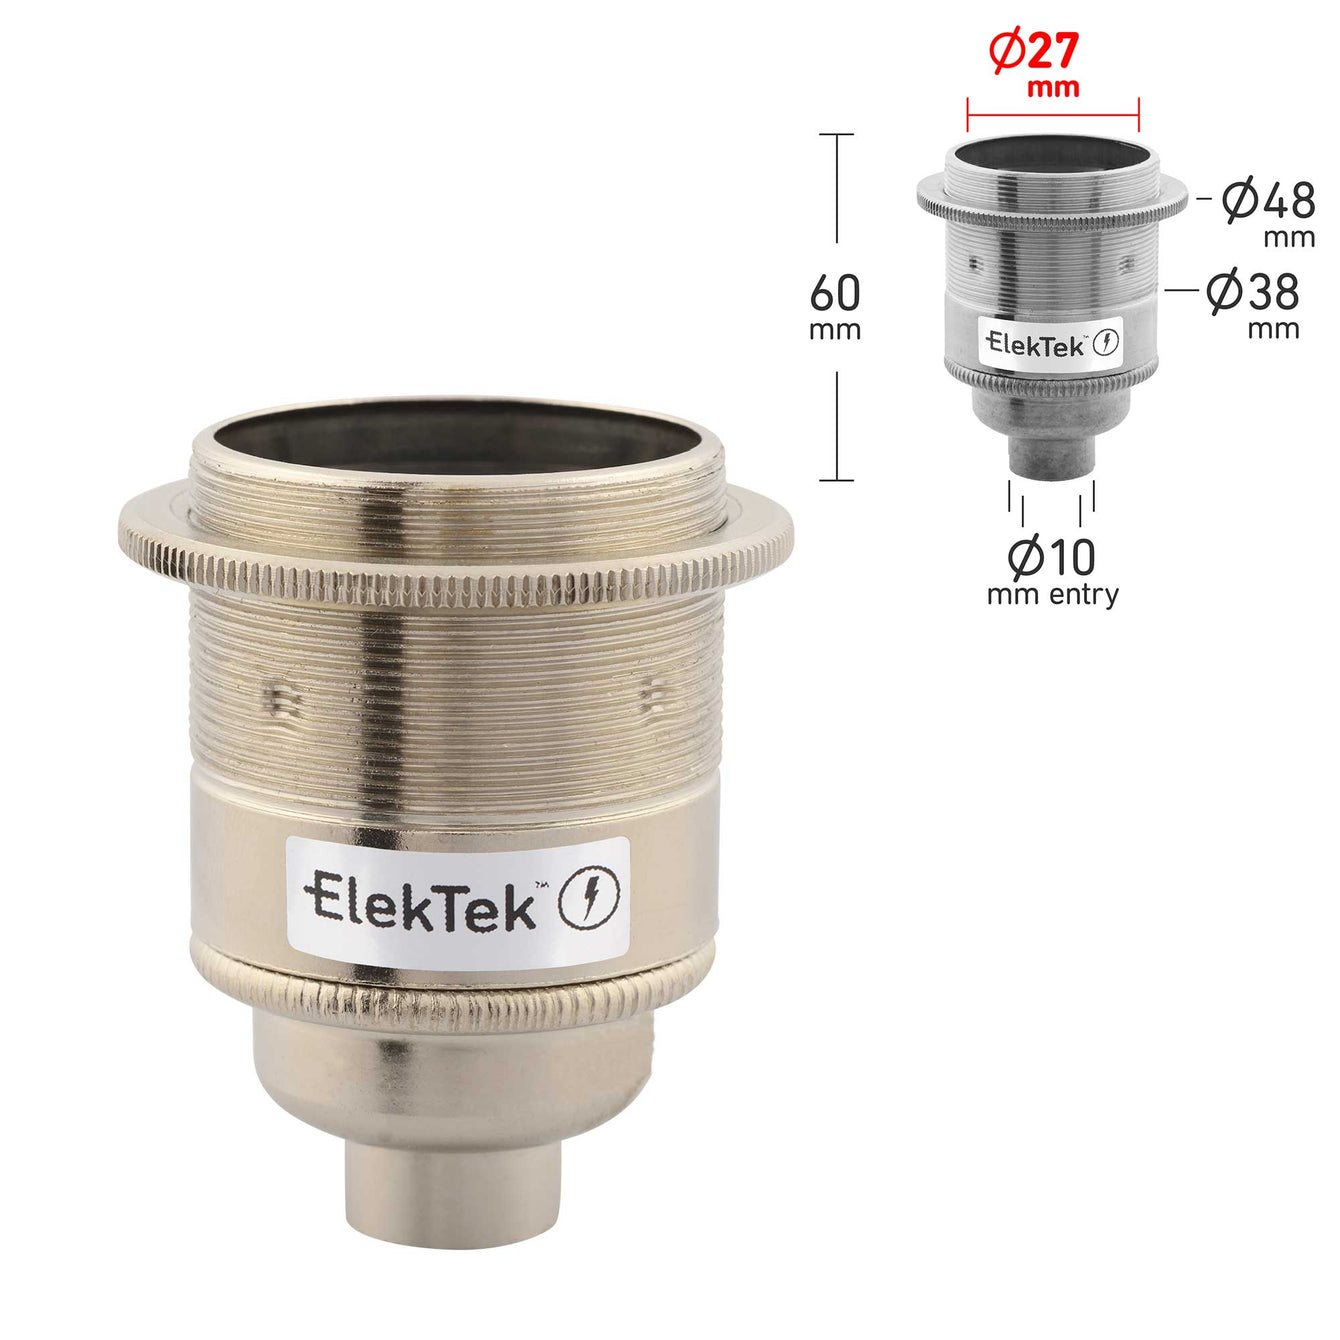 ElekTek ES Edison Screw E27 Lamp Holder With Shade Ring 10mm or Half Inch Entry Ideal for Vintage Filament Bulbs Brass - Buy It Better Nickel / Half Inch